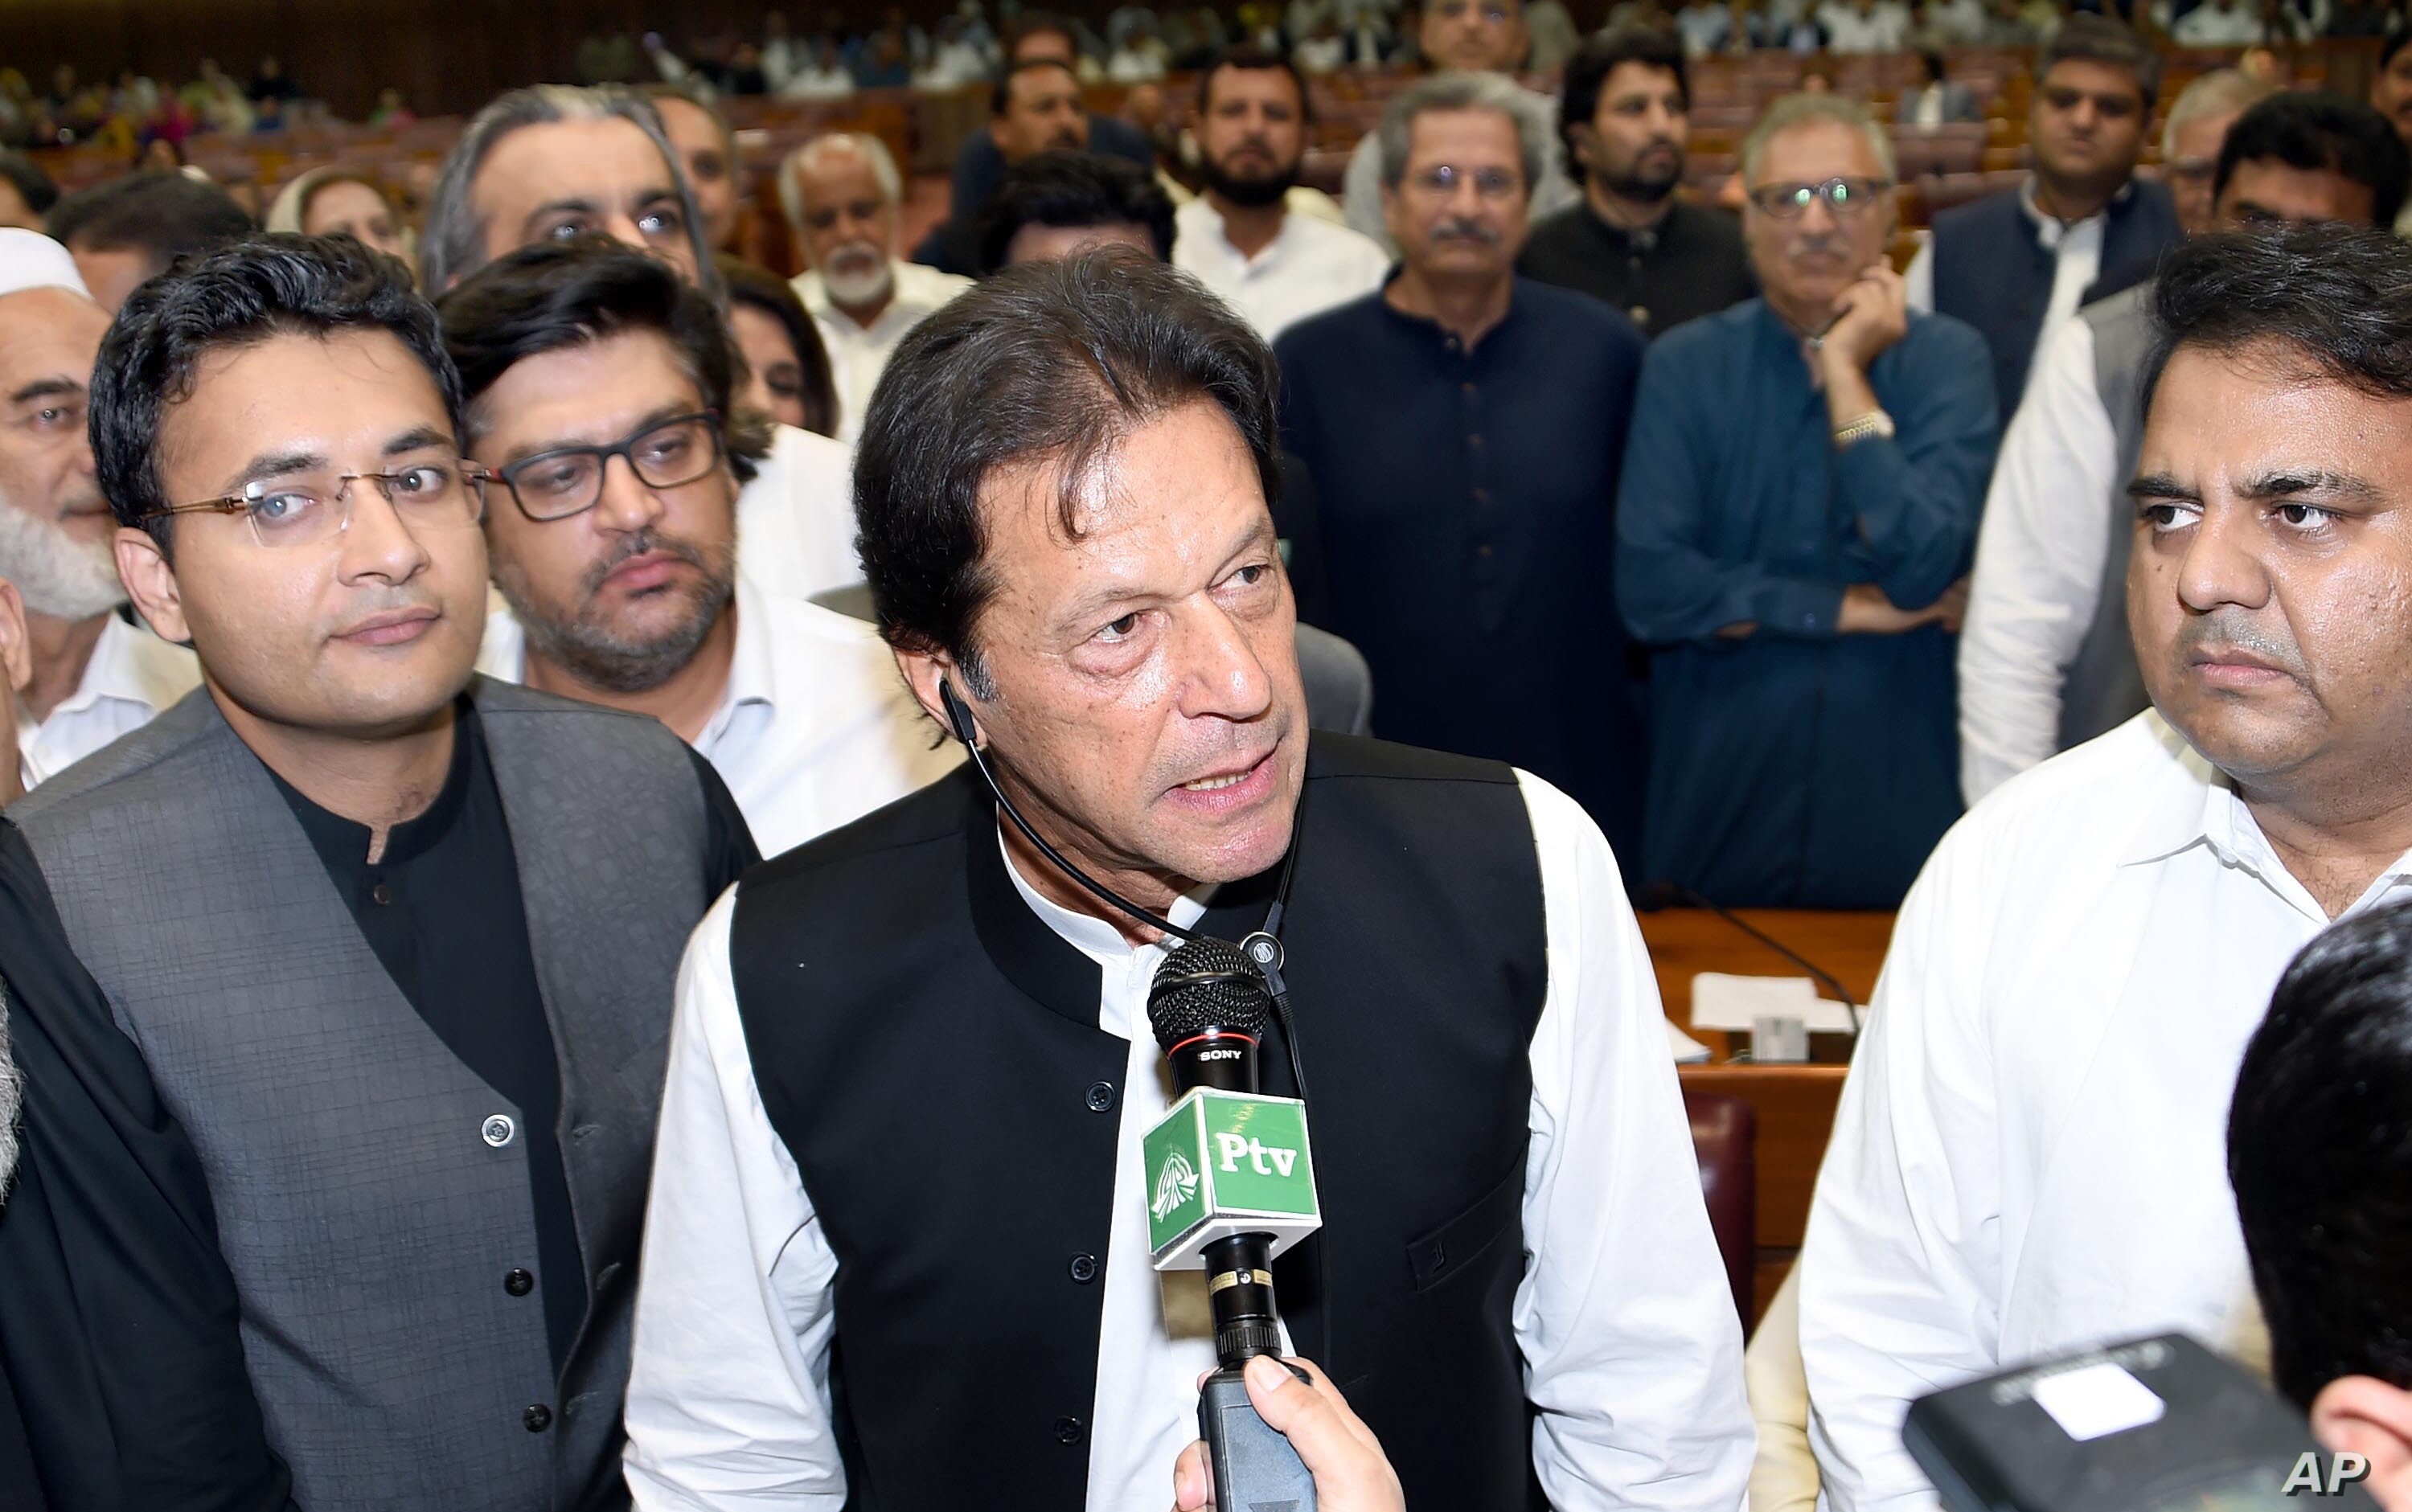 PM Imran hits back at opposition for calling him ‘selected’